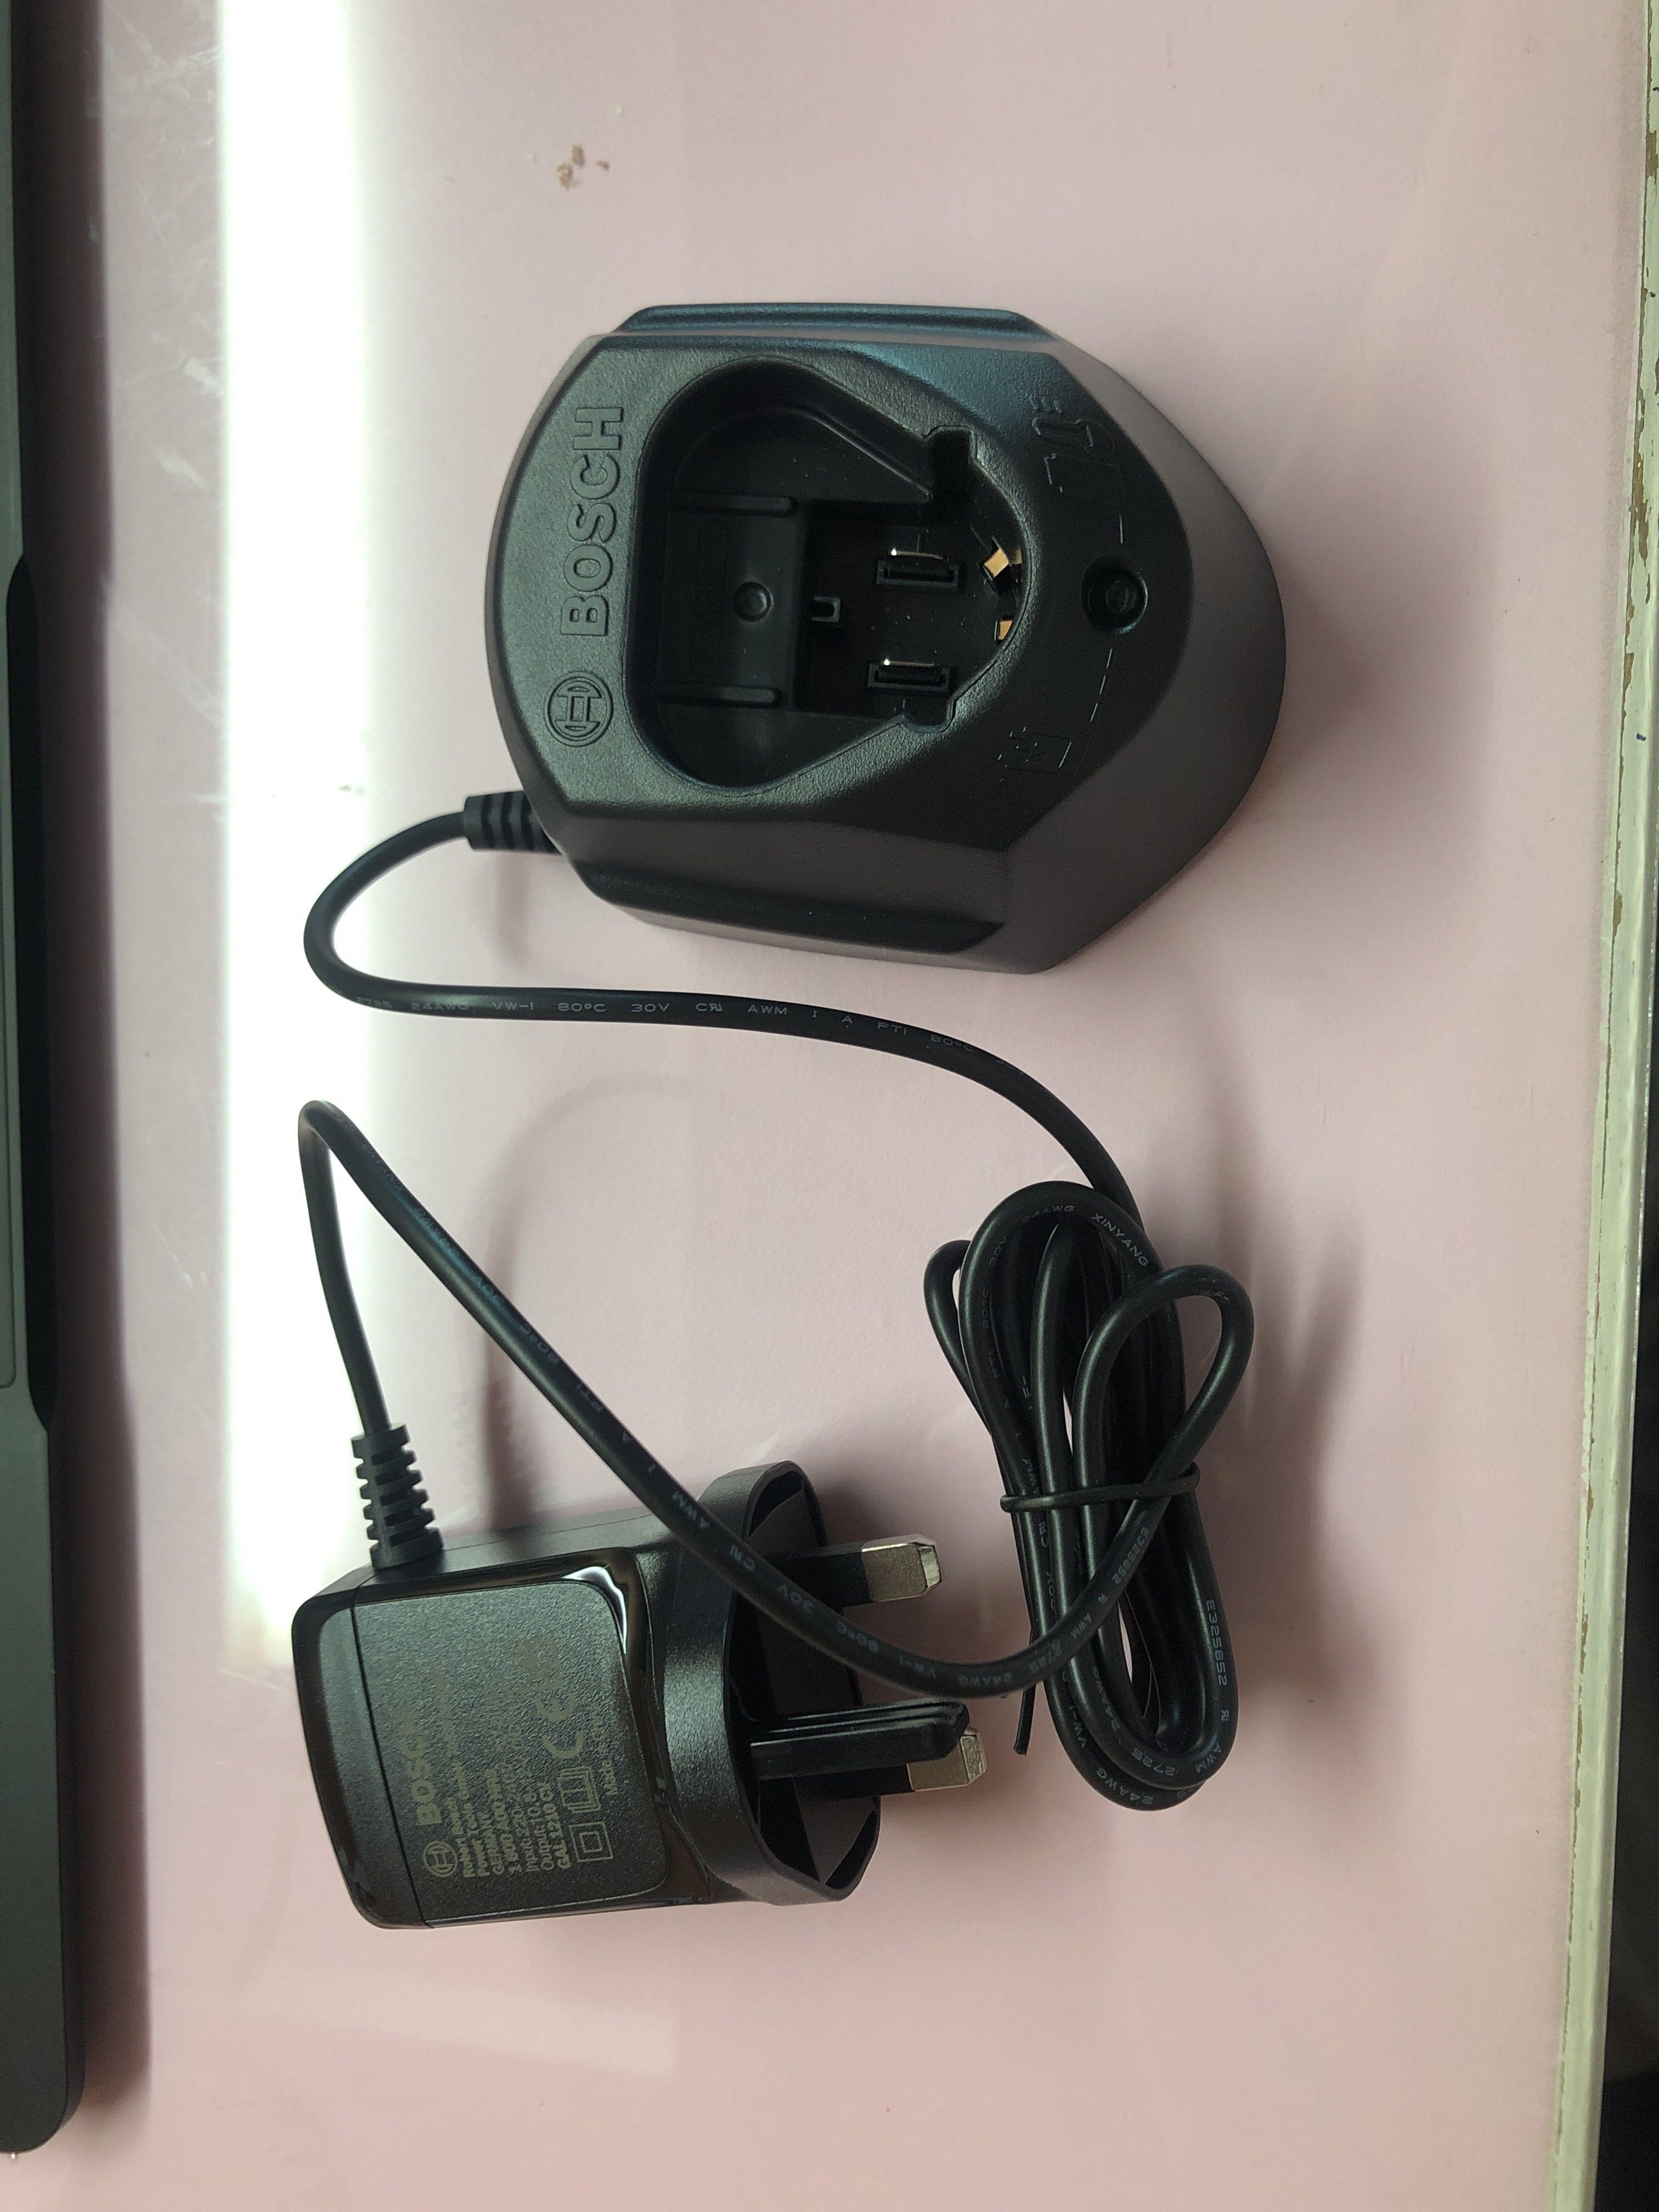 NEW] BOSCH 12V CHARGER / FOR BOSCH 12V TOOLS/ FOR GSR 120-LI / FOR GSB  120-LI AND MANY MORE, Food & Drinks, Local Eats on Carousell